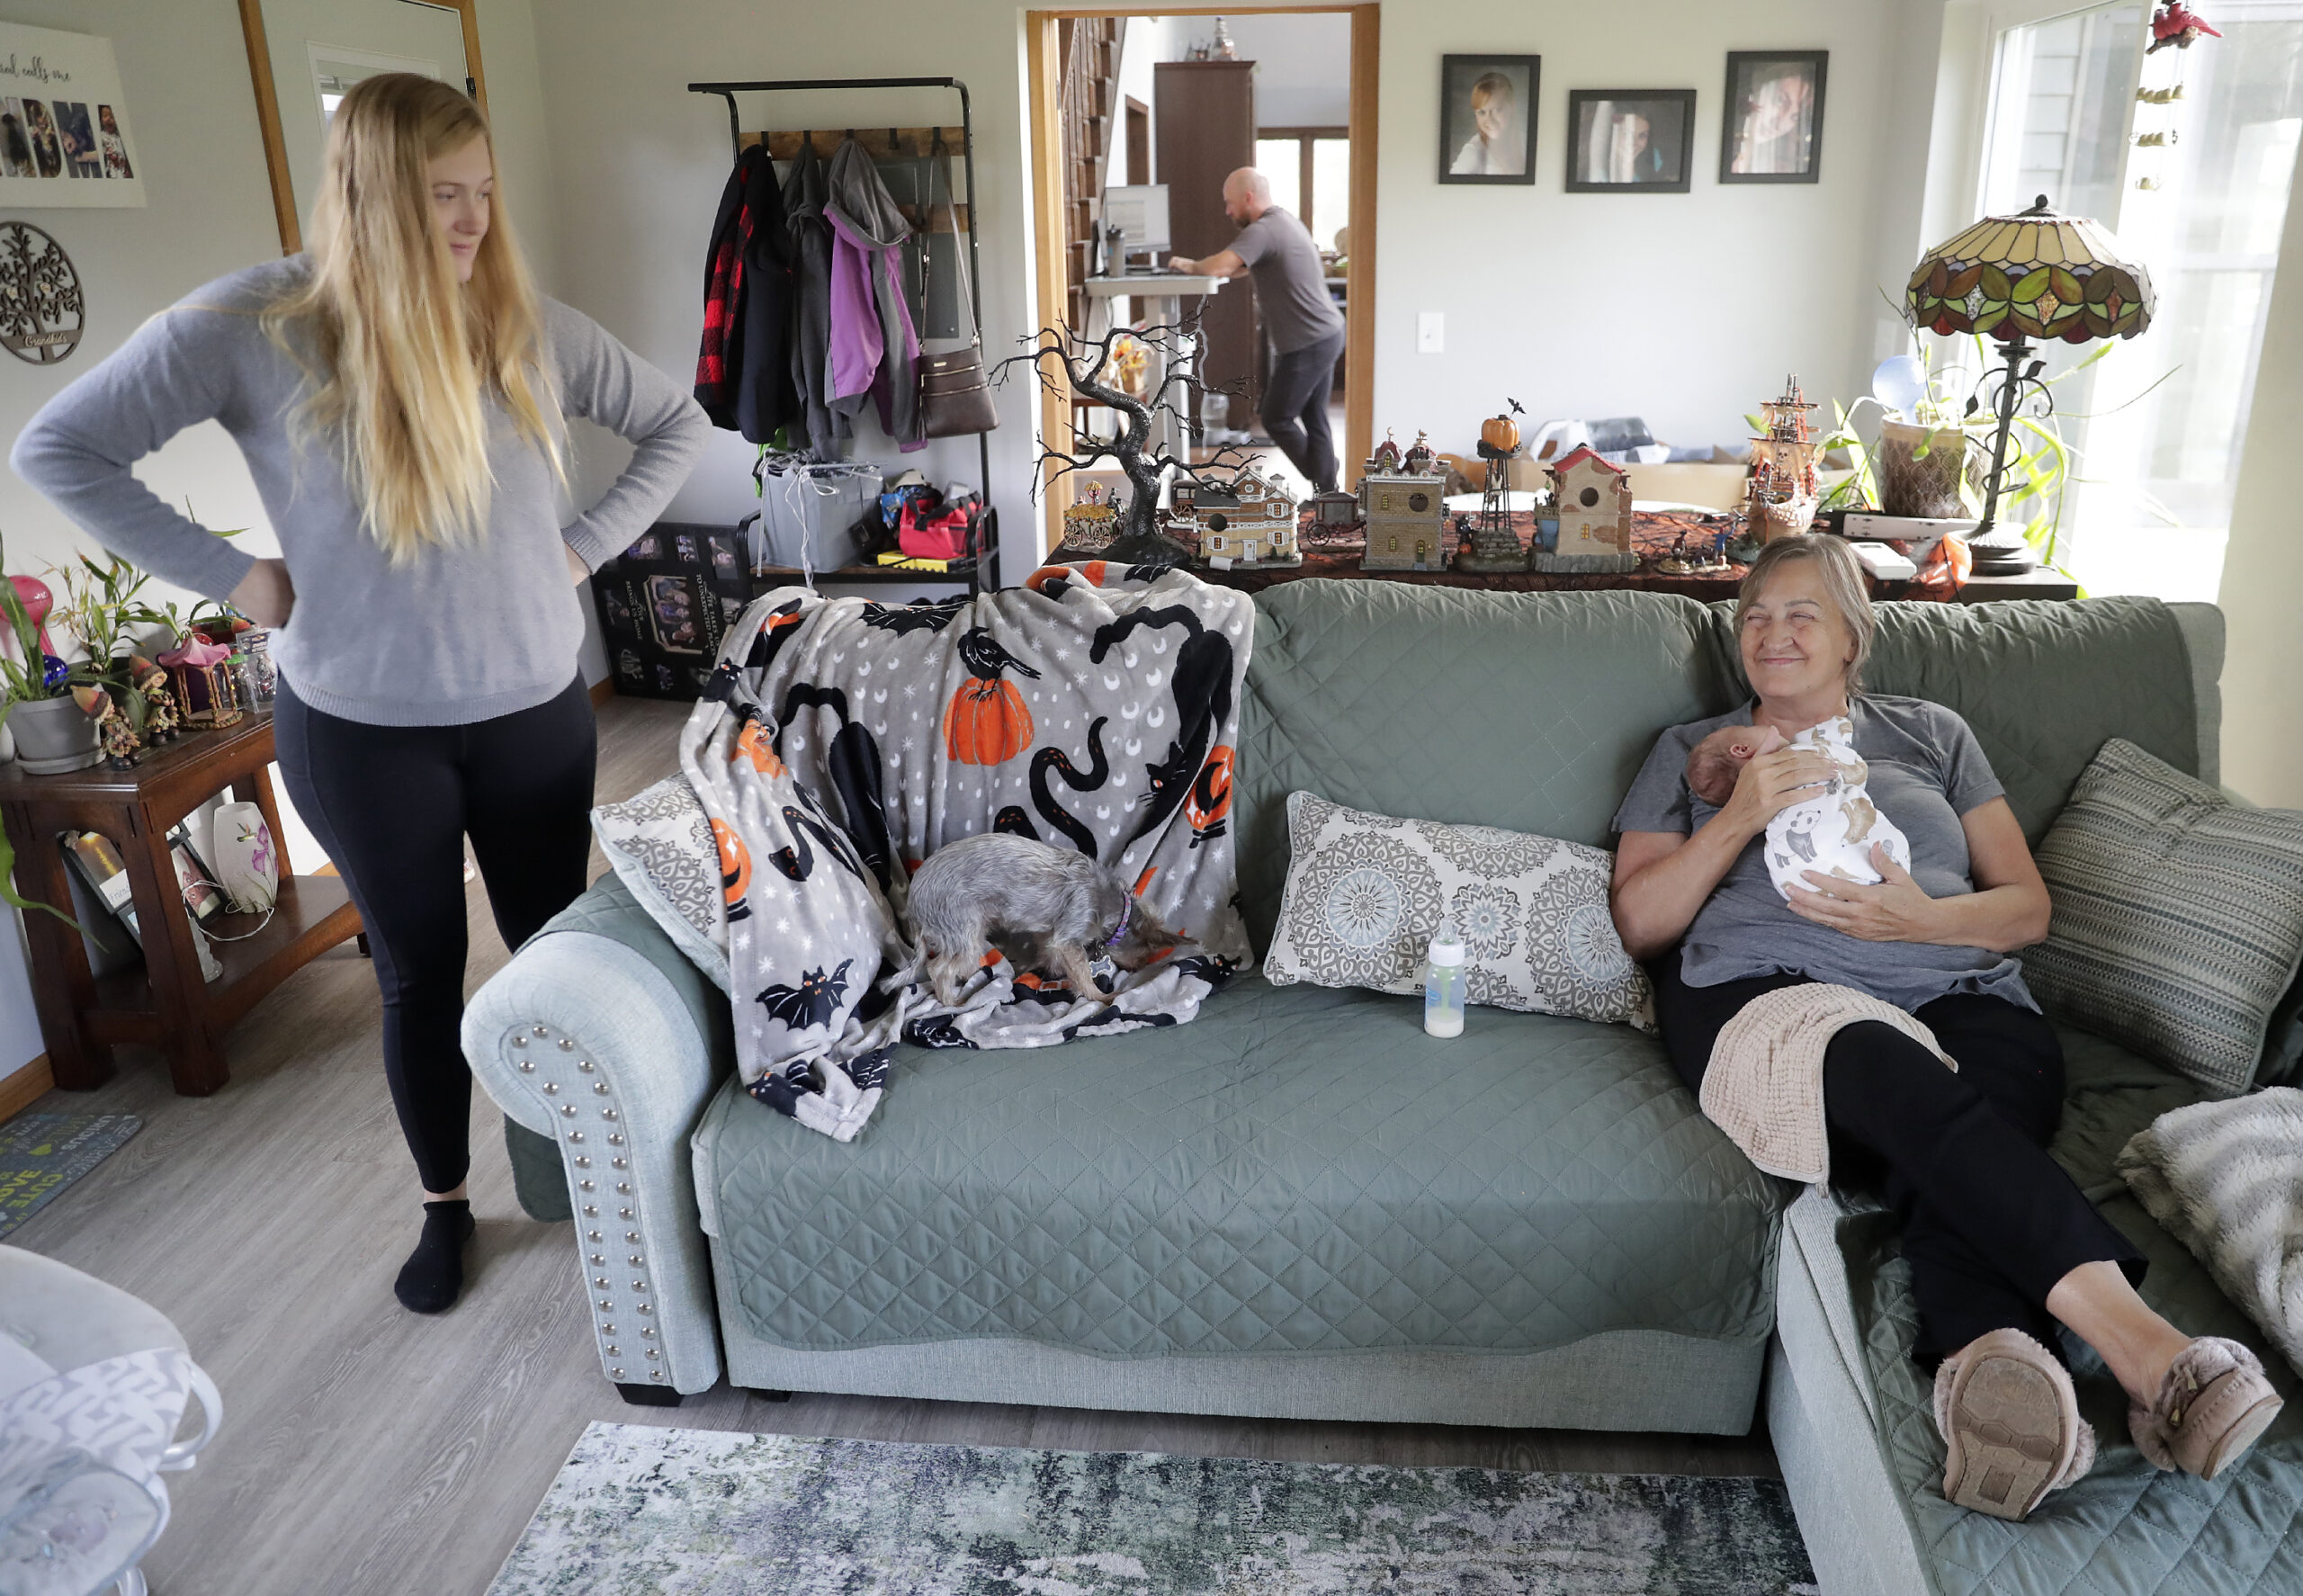 A woman sits on the couch with her grandson while his mother stands in the living room next to them